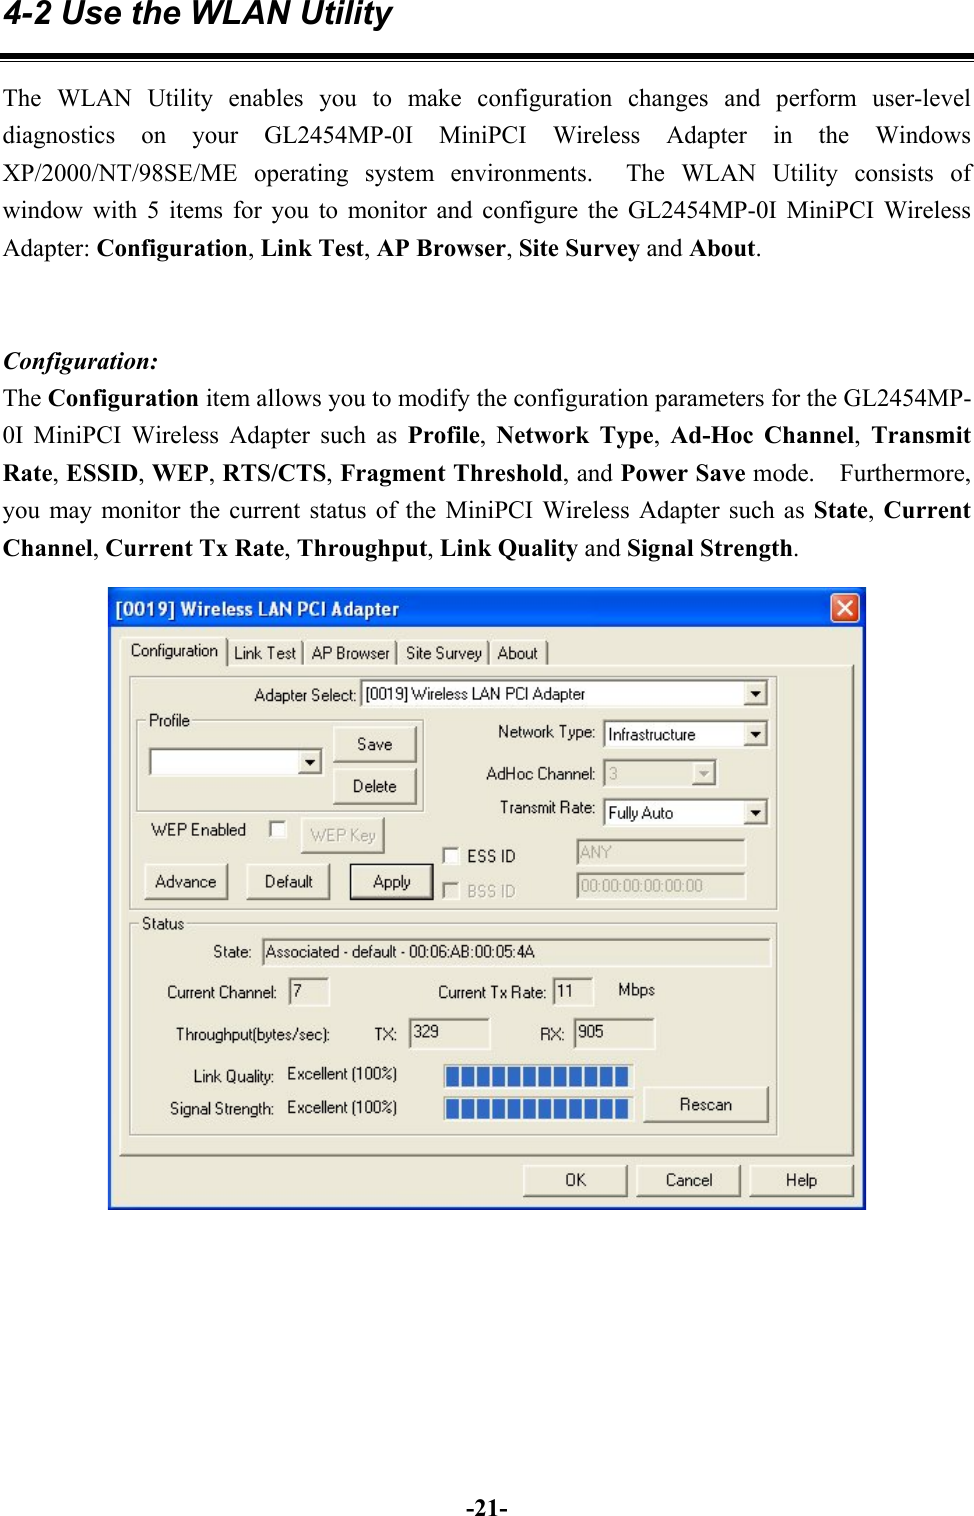 -21-4-2 Use the WLAN UtilityThe WLAN Utility enables you to make configuration changes and perform user-leveldiagnostics on your GL2454MP-0I MiniPCI Wireless Adapter in the WindowsXP/2000/NT/98SE/ME operating system environments.  The WLAN Utility consists ofwindow with 5 items for you to monitor and configure the GL2454MP-0I MiniPCI WirelessAdapter: Configuration, Link Test, AP Browser, Site Survey and About.Configuration:The Configuration item allows you to modify the configuration parameters for the GL2454MP-0I MiniPCI Wireless Adapter such as Profile,  Network Type,  Ad-Hoc Channel,  TransmitRate, ESSID, WEP, RTS/CTS, Fragment Threshold, and Power Save mode.  Furthermore,you may monitor the current status of the MiniPCI Wireless Adapter such as State, CurrentChannel, Current Tx Rate, Throughput, Link Quality and Signal Strength.